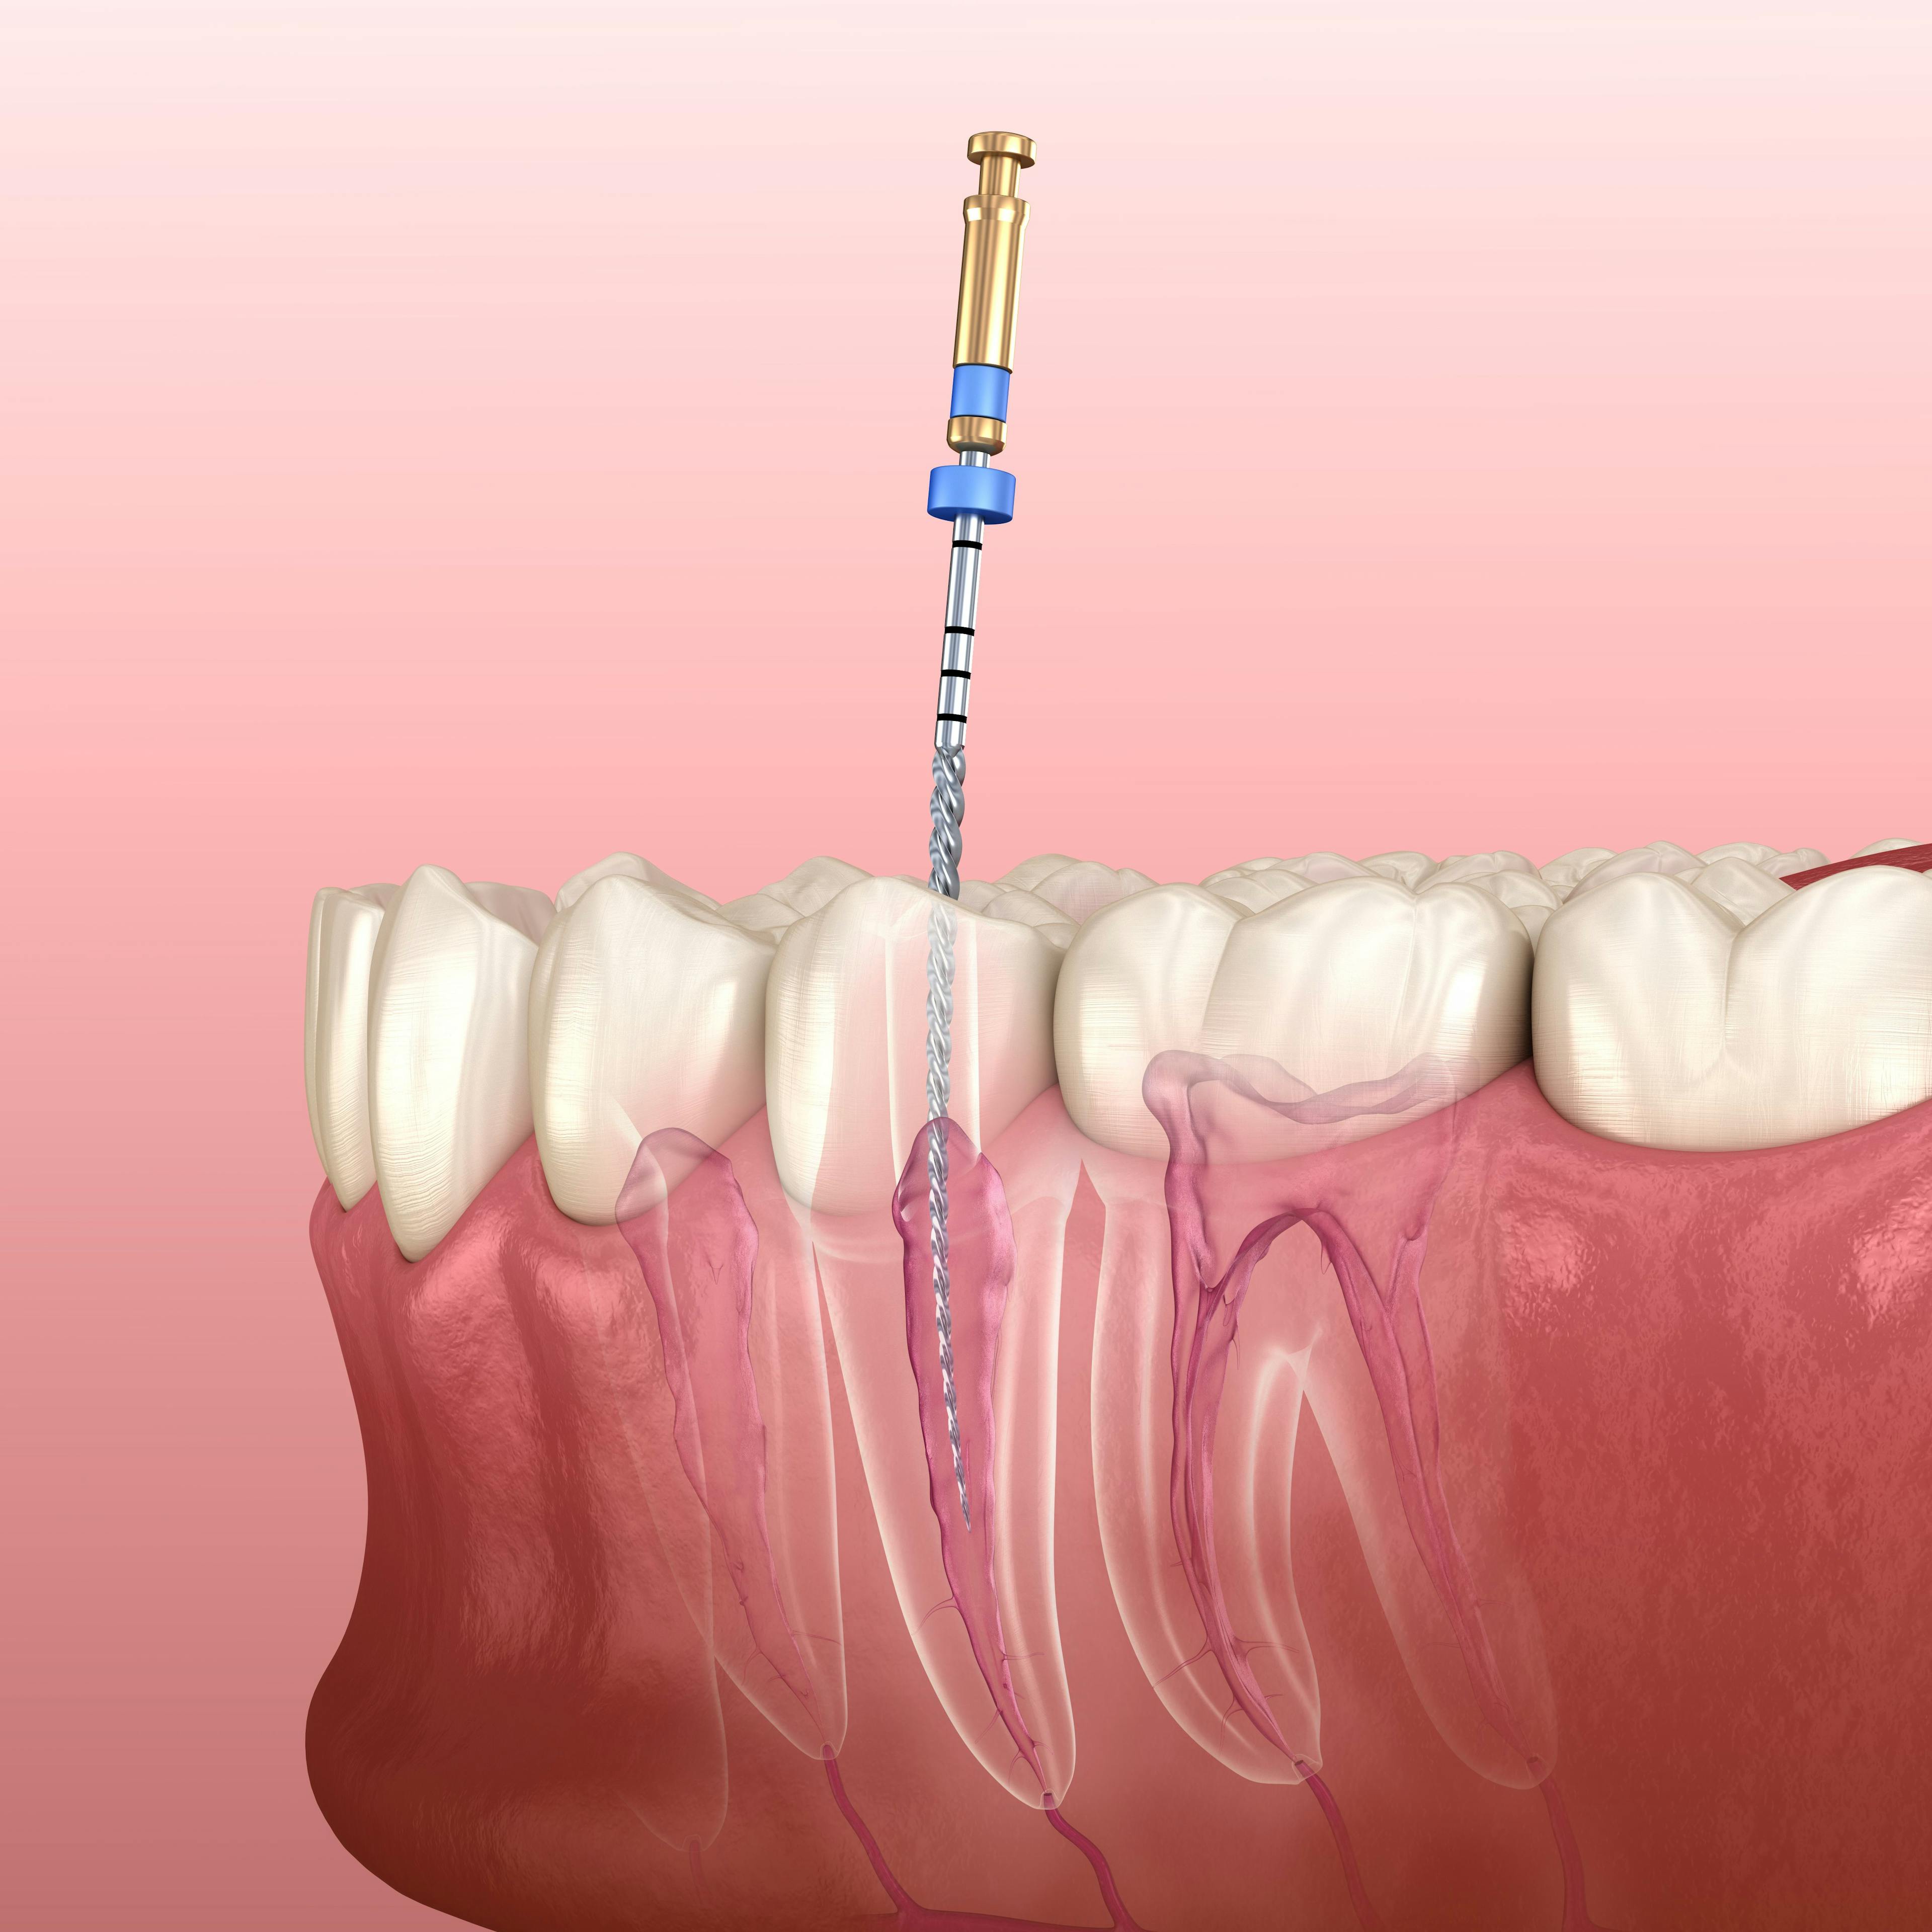 A visualization of an endodontic root canal procedure in the oral environment